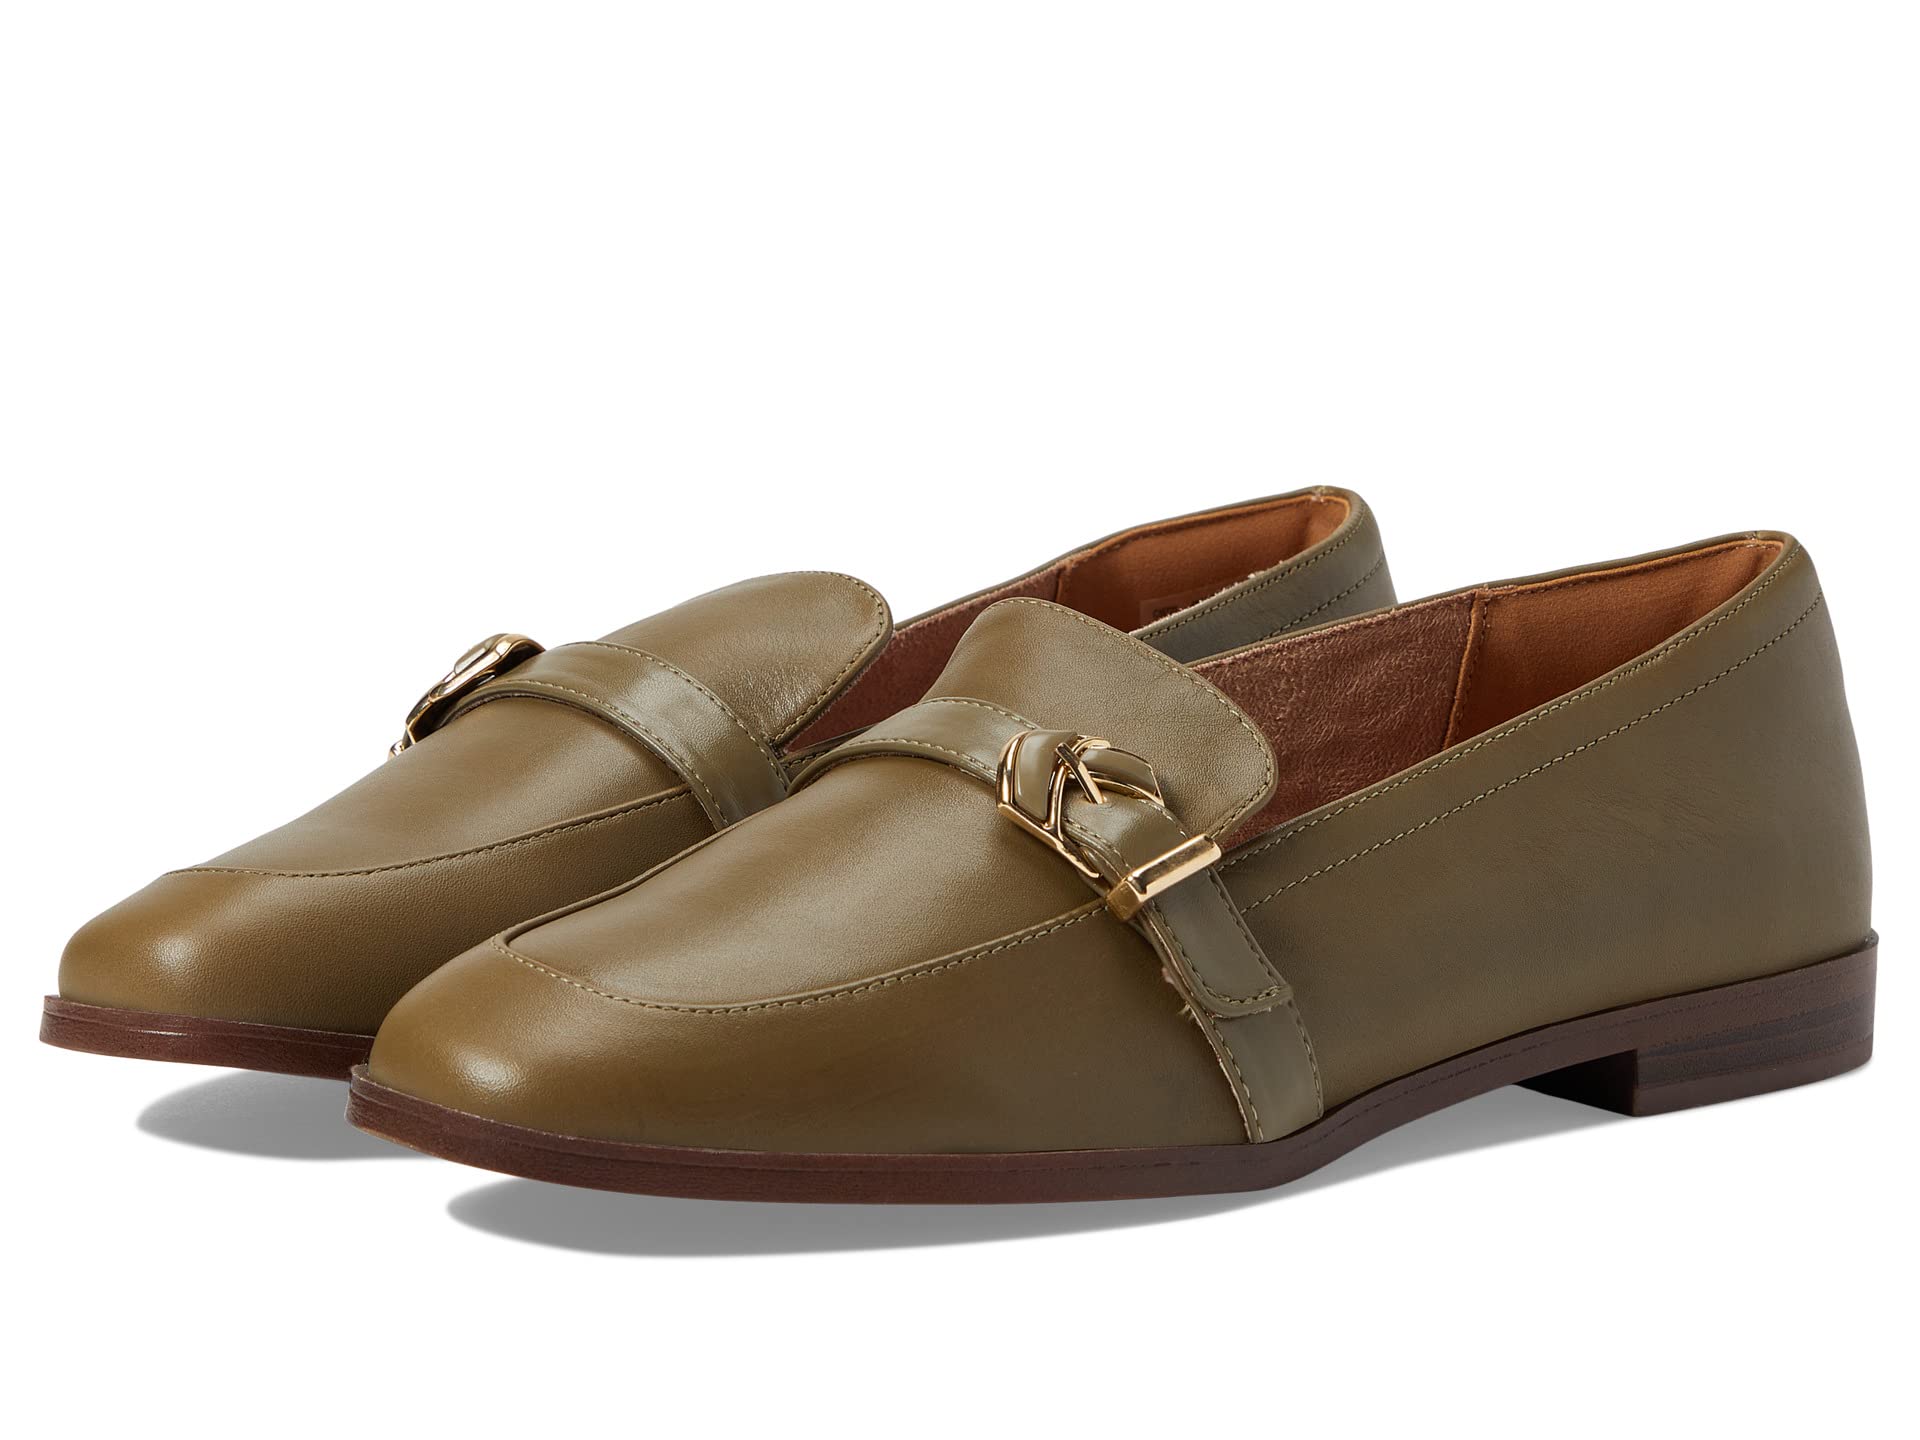 Мокасины Rockport, Susana Knot Loafer лоферы rockport susana knot loafer цвет forest leather